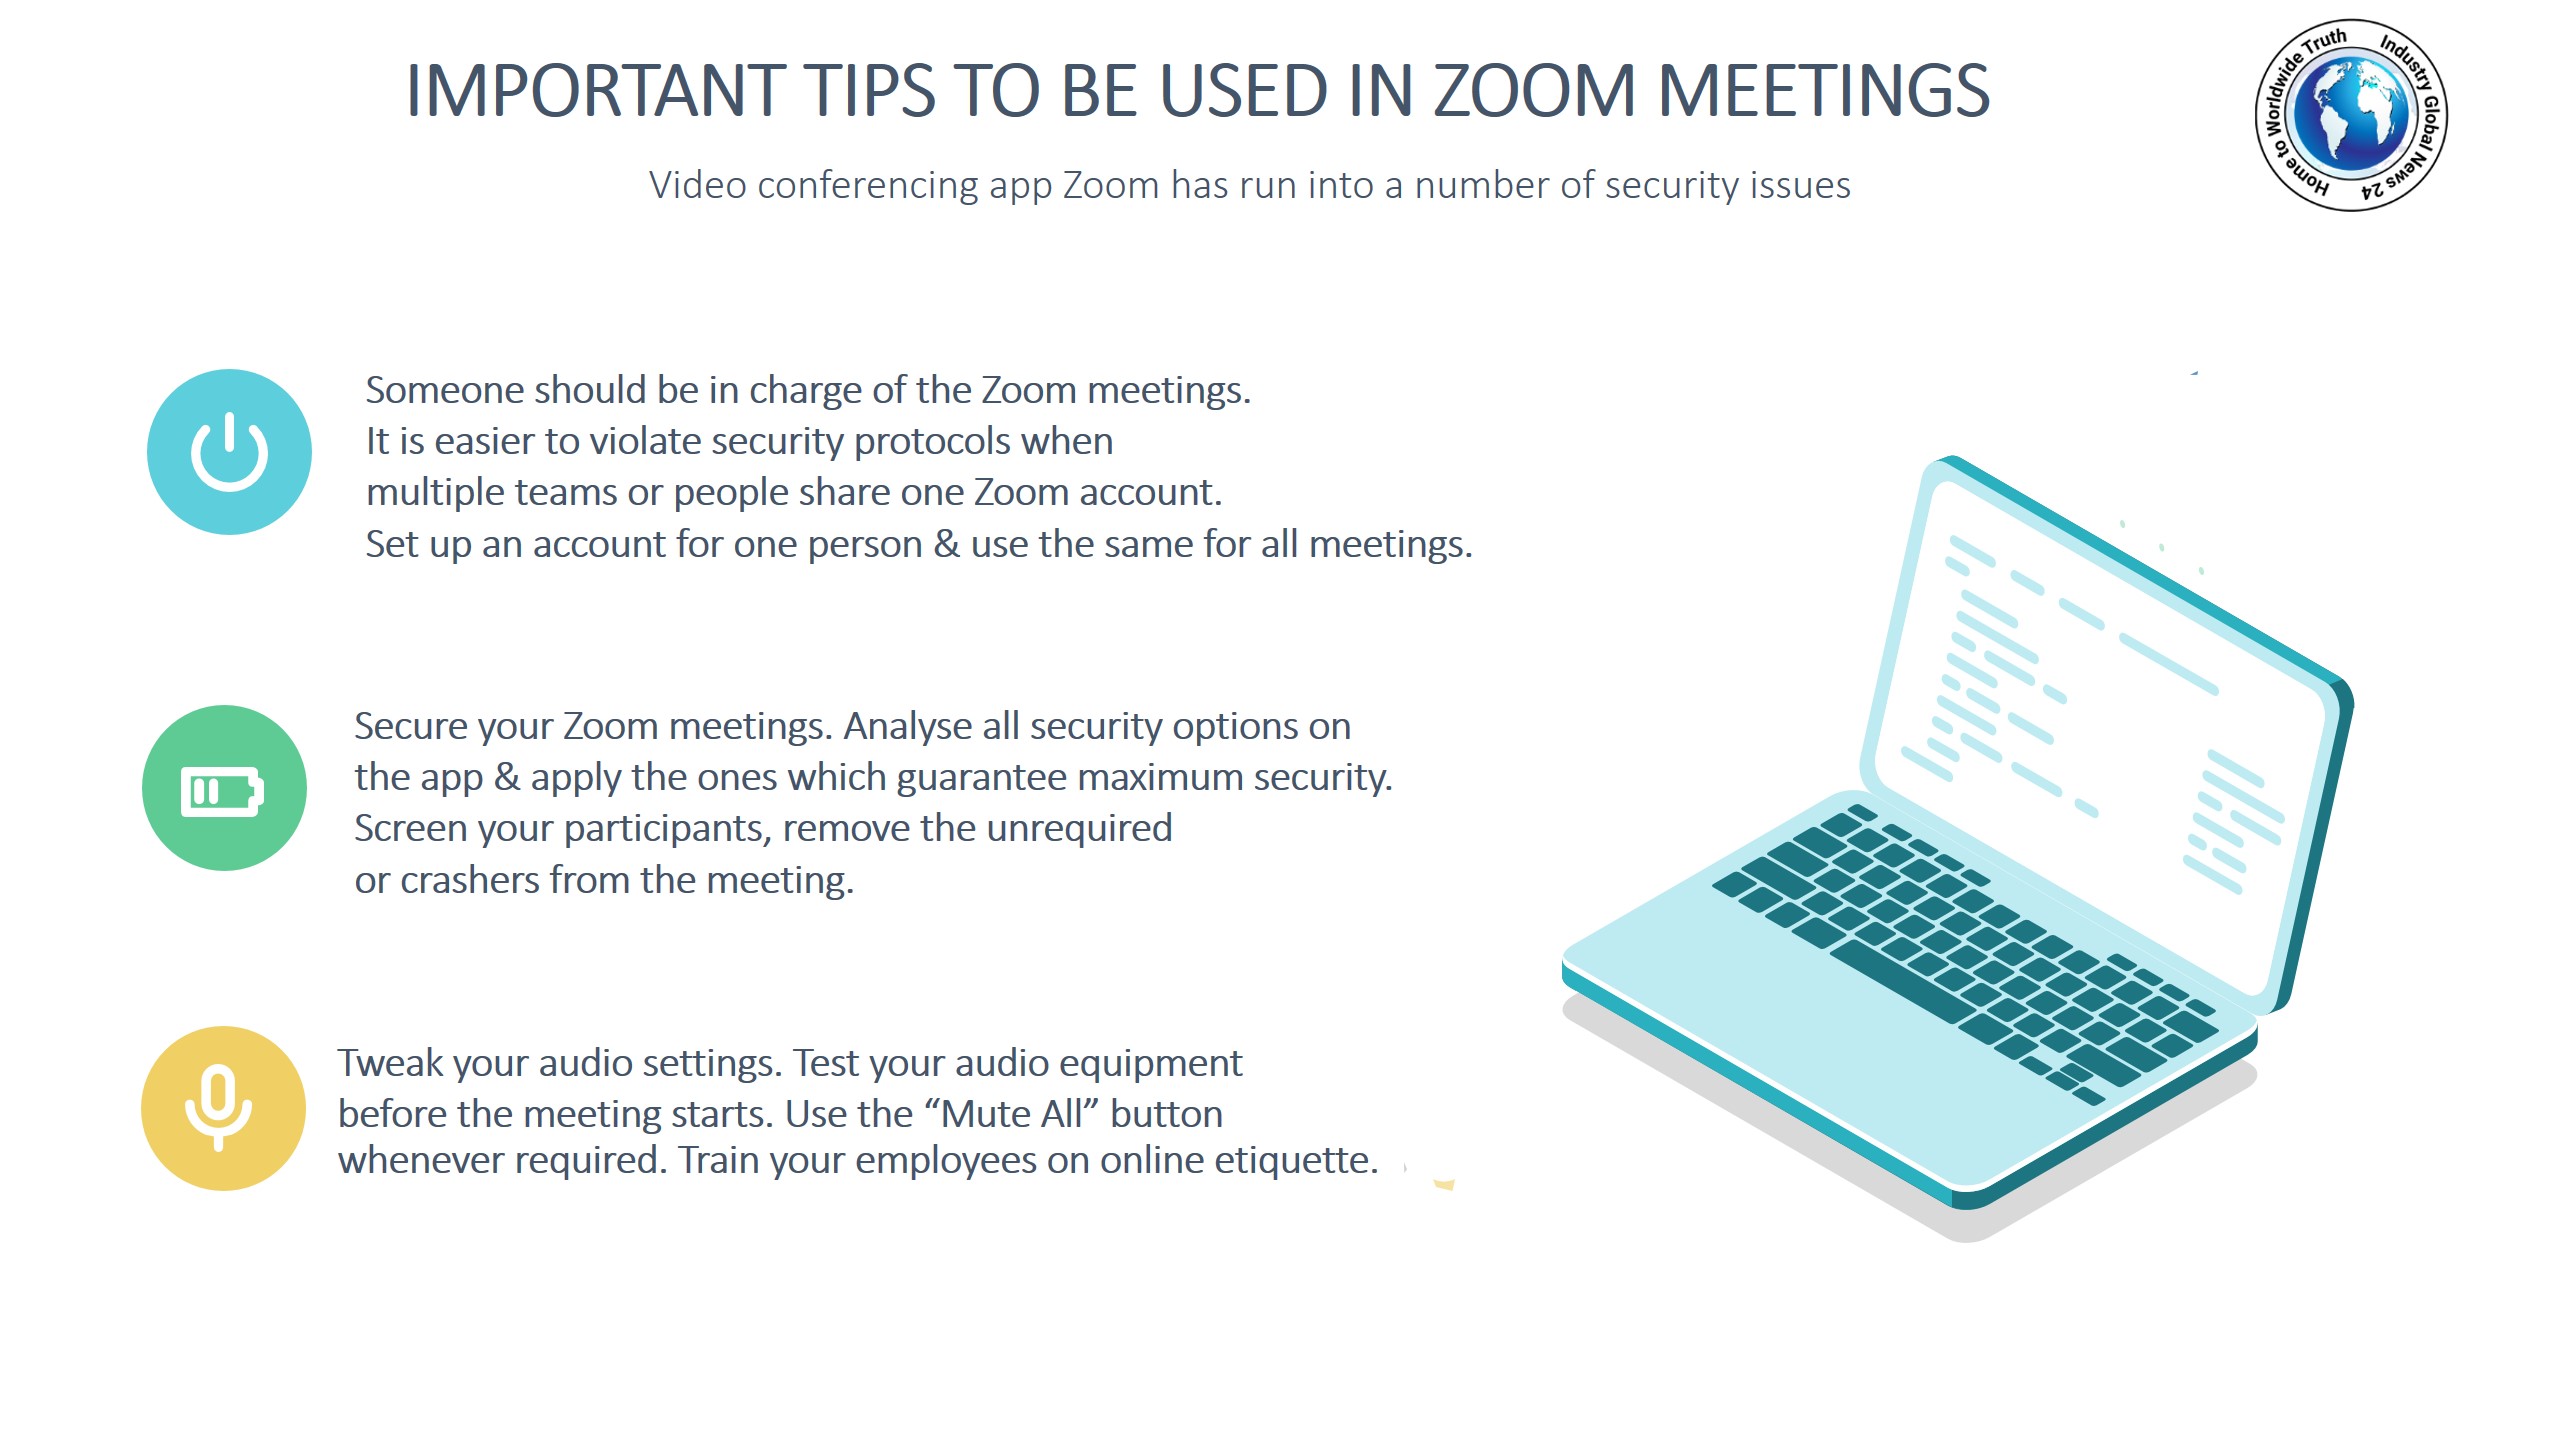 Important tips to be used in Zoom meetings